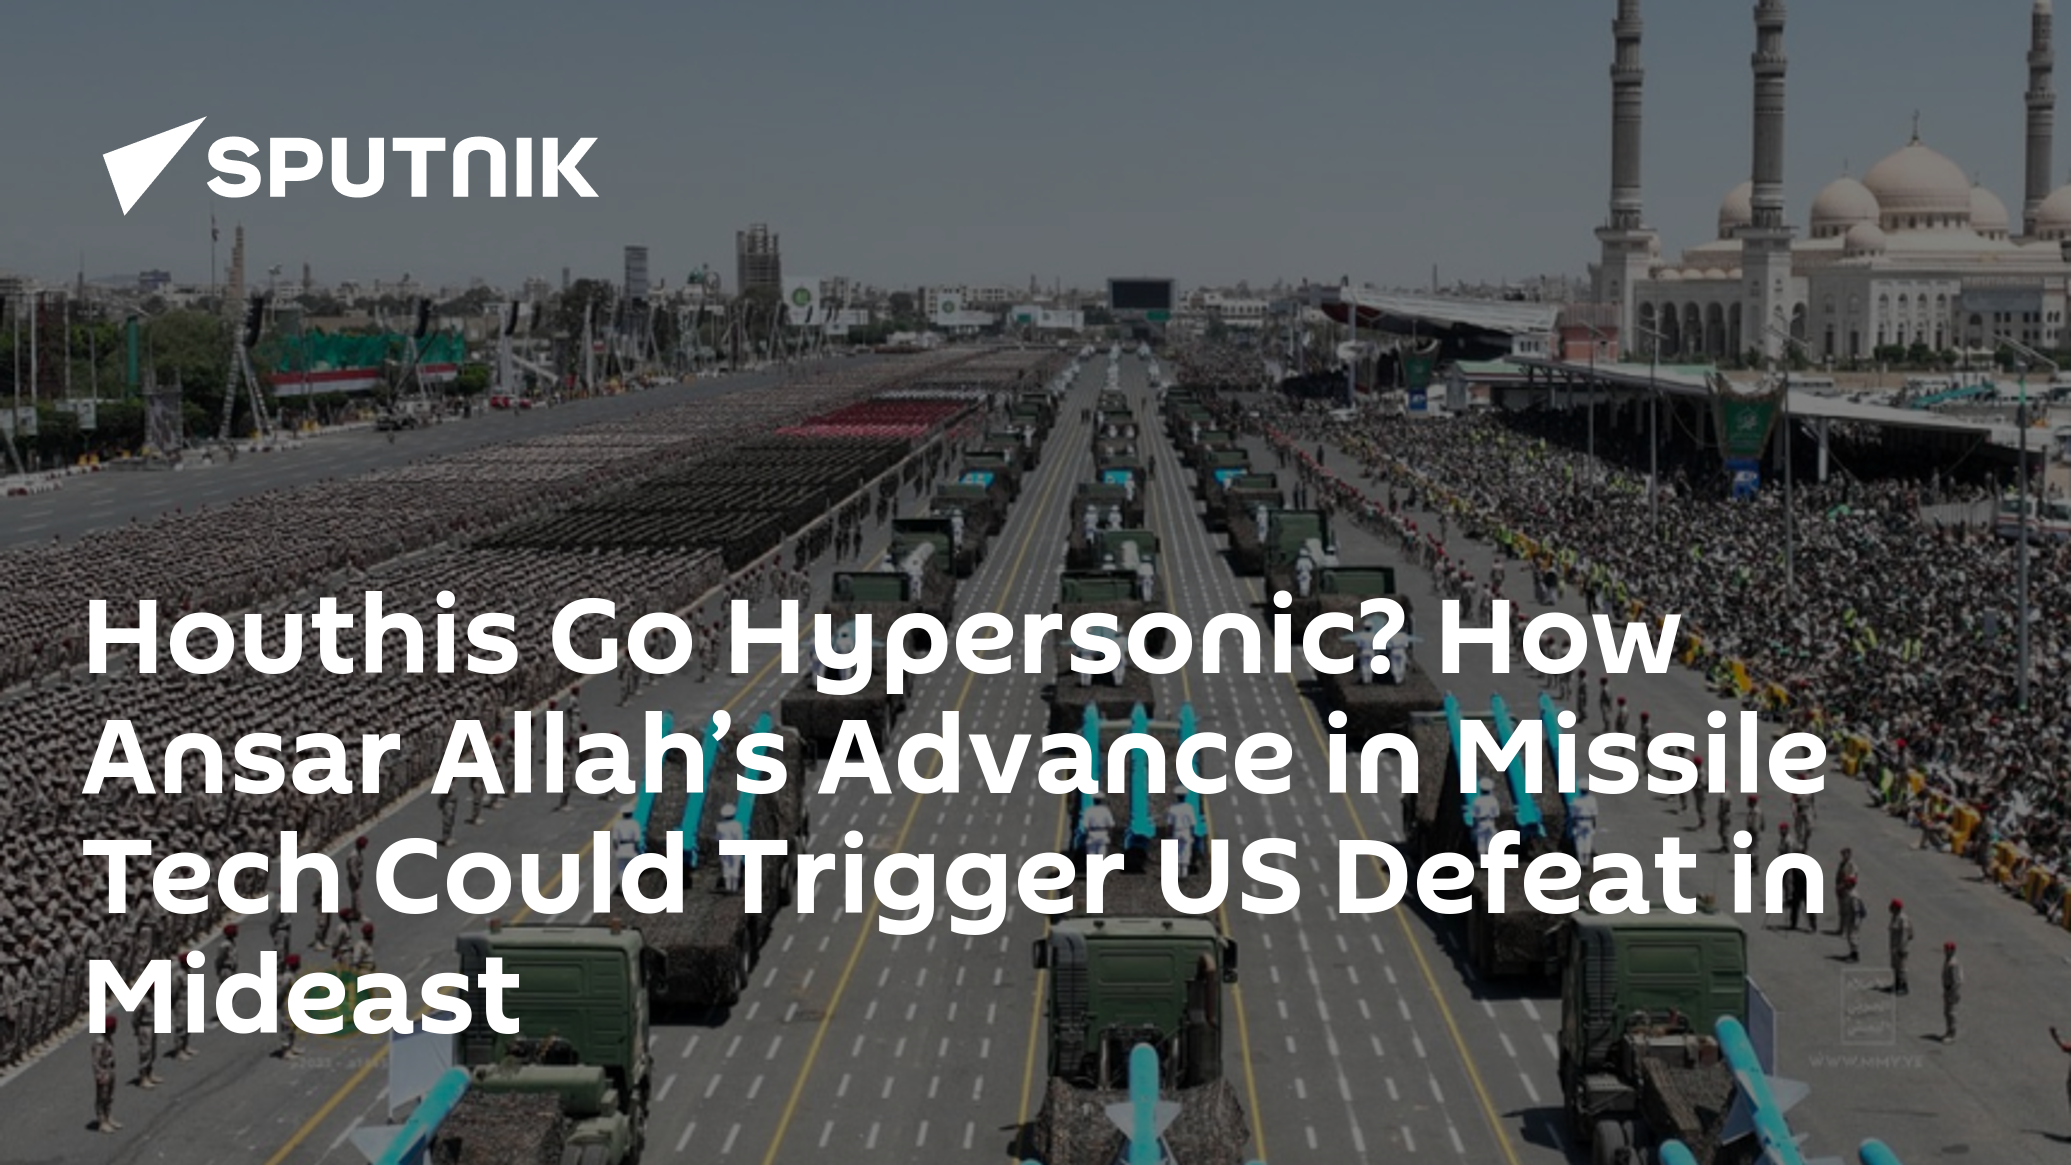 Houthis Go Hypersonic? How Ansar Allahs Advance in Missile Tech Could Trigger US Defeat in Mideast [Video]